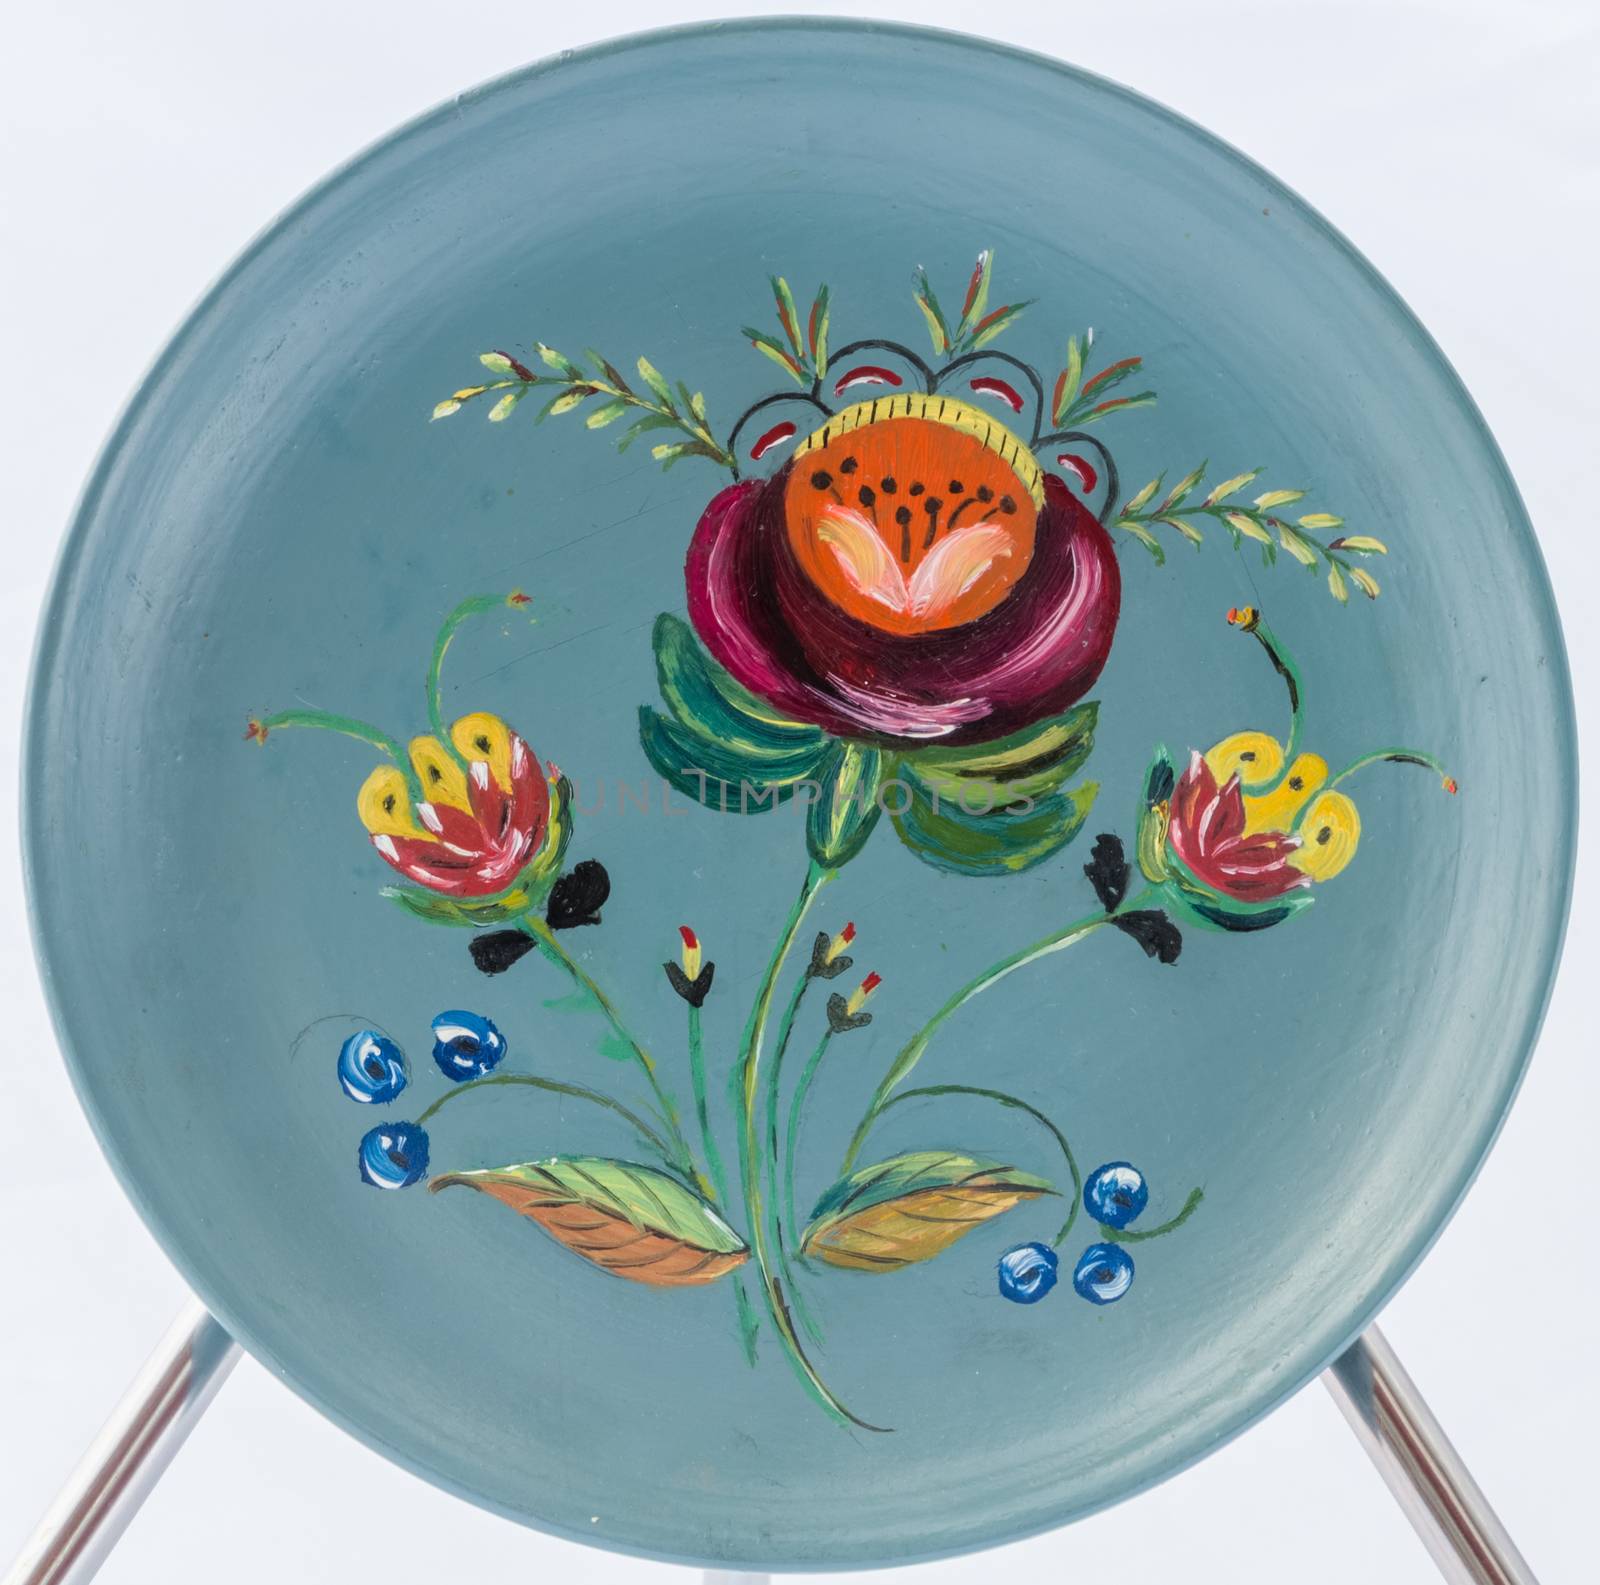 Rosemåling, or rosemaling is the name of a traditional form of decorative folk art that originated in the rural valleys of Norway